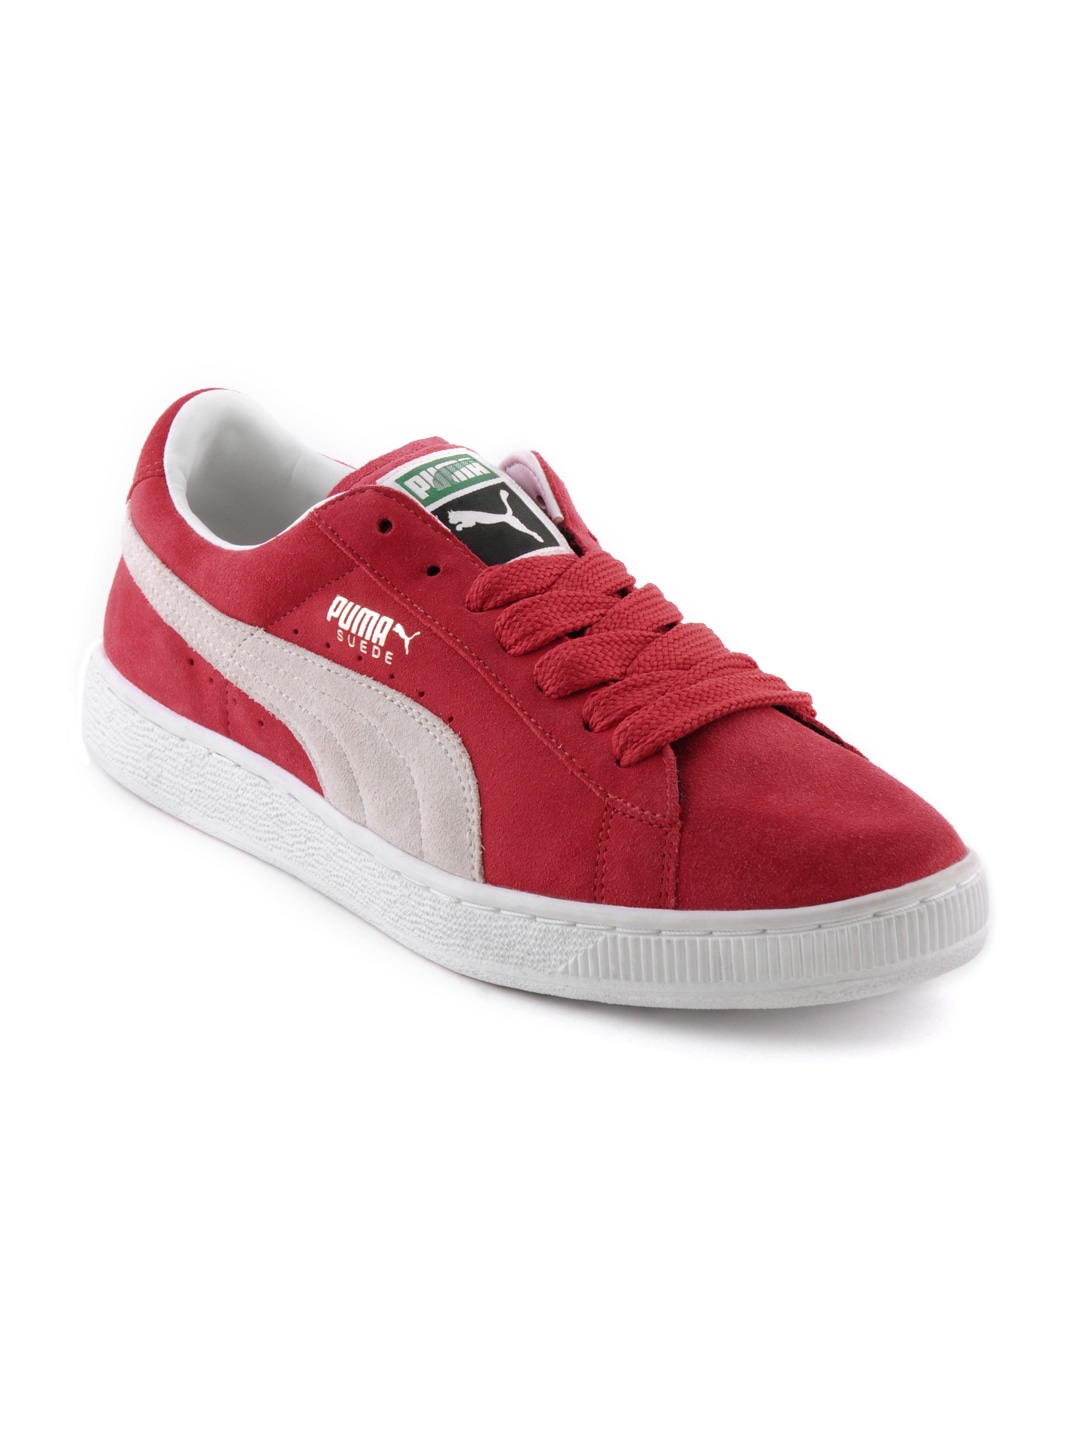 Puma Men Suede Archive Red Casual Shoes